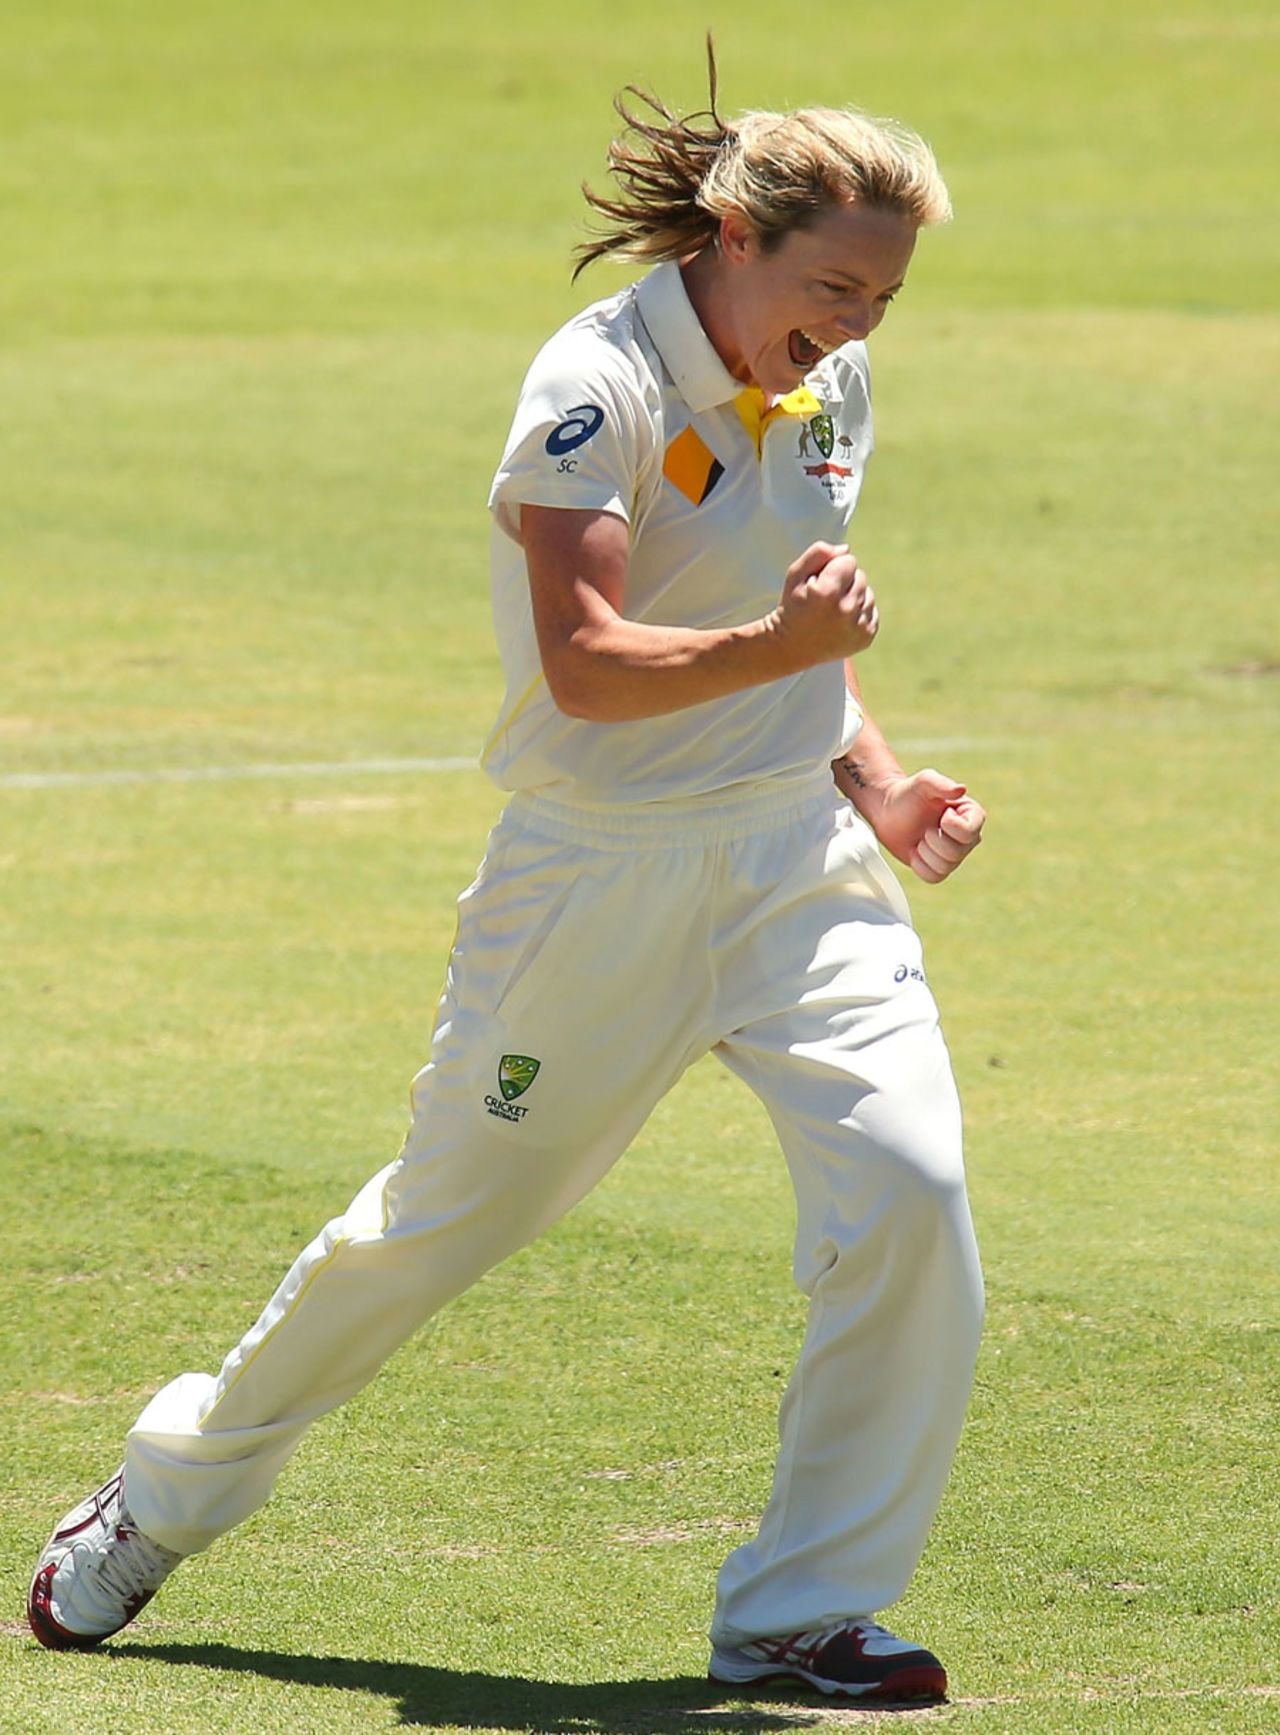 Sarah Coyte is charged up after a dismissal, Australia v England, Only Test, Perth, 1st day, January 10, 2013